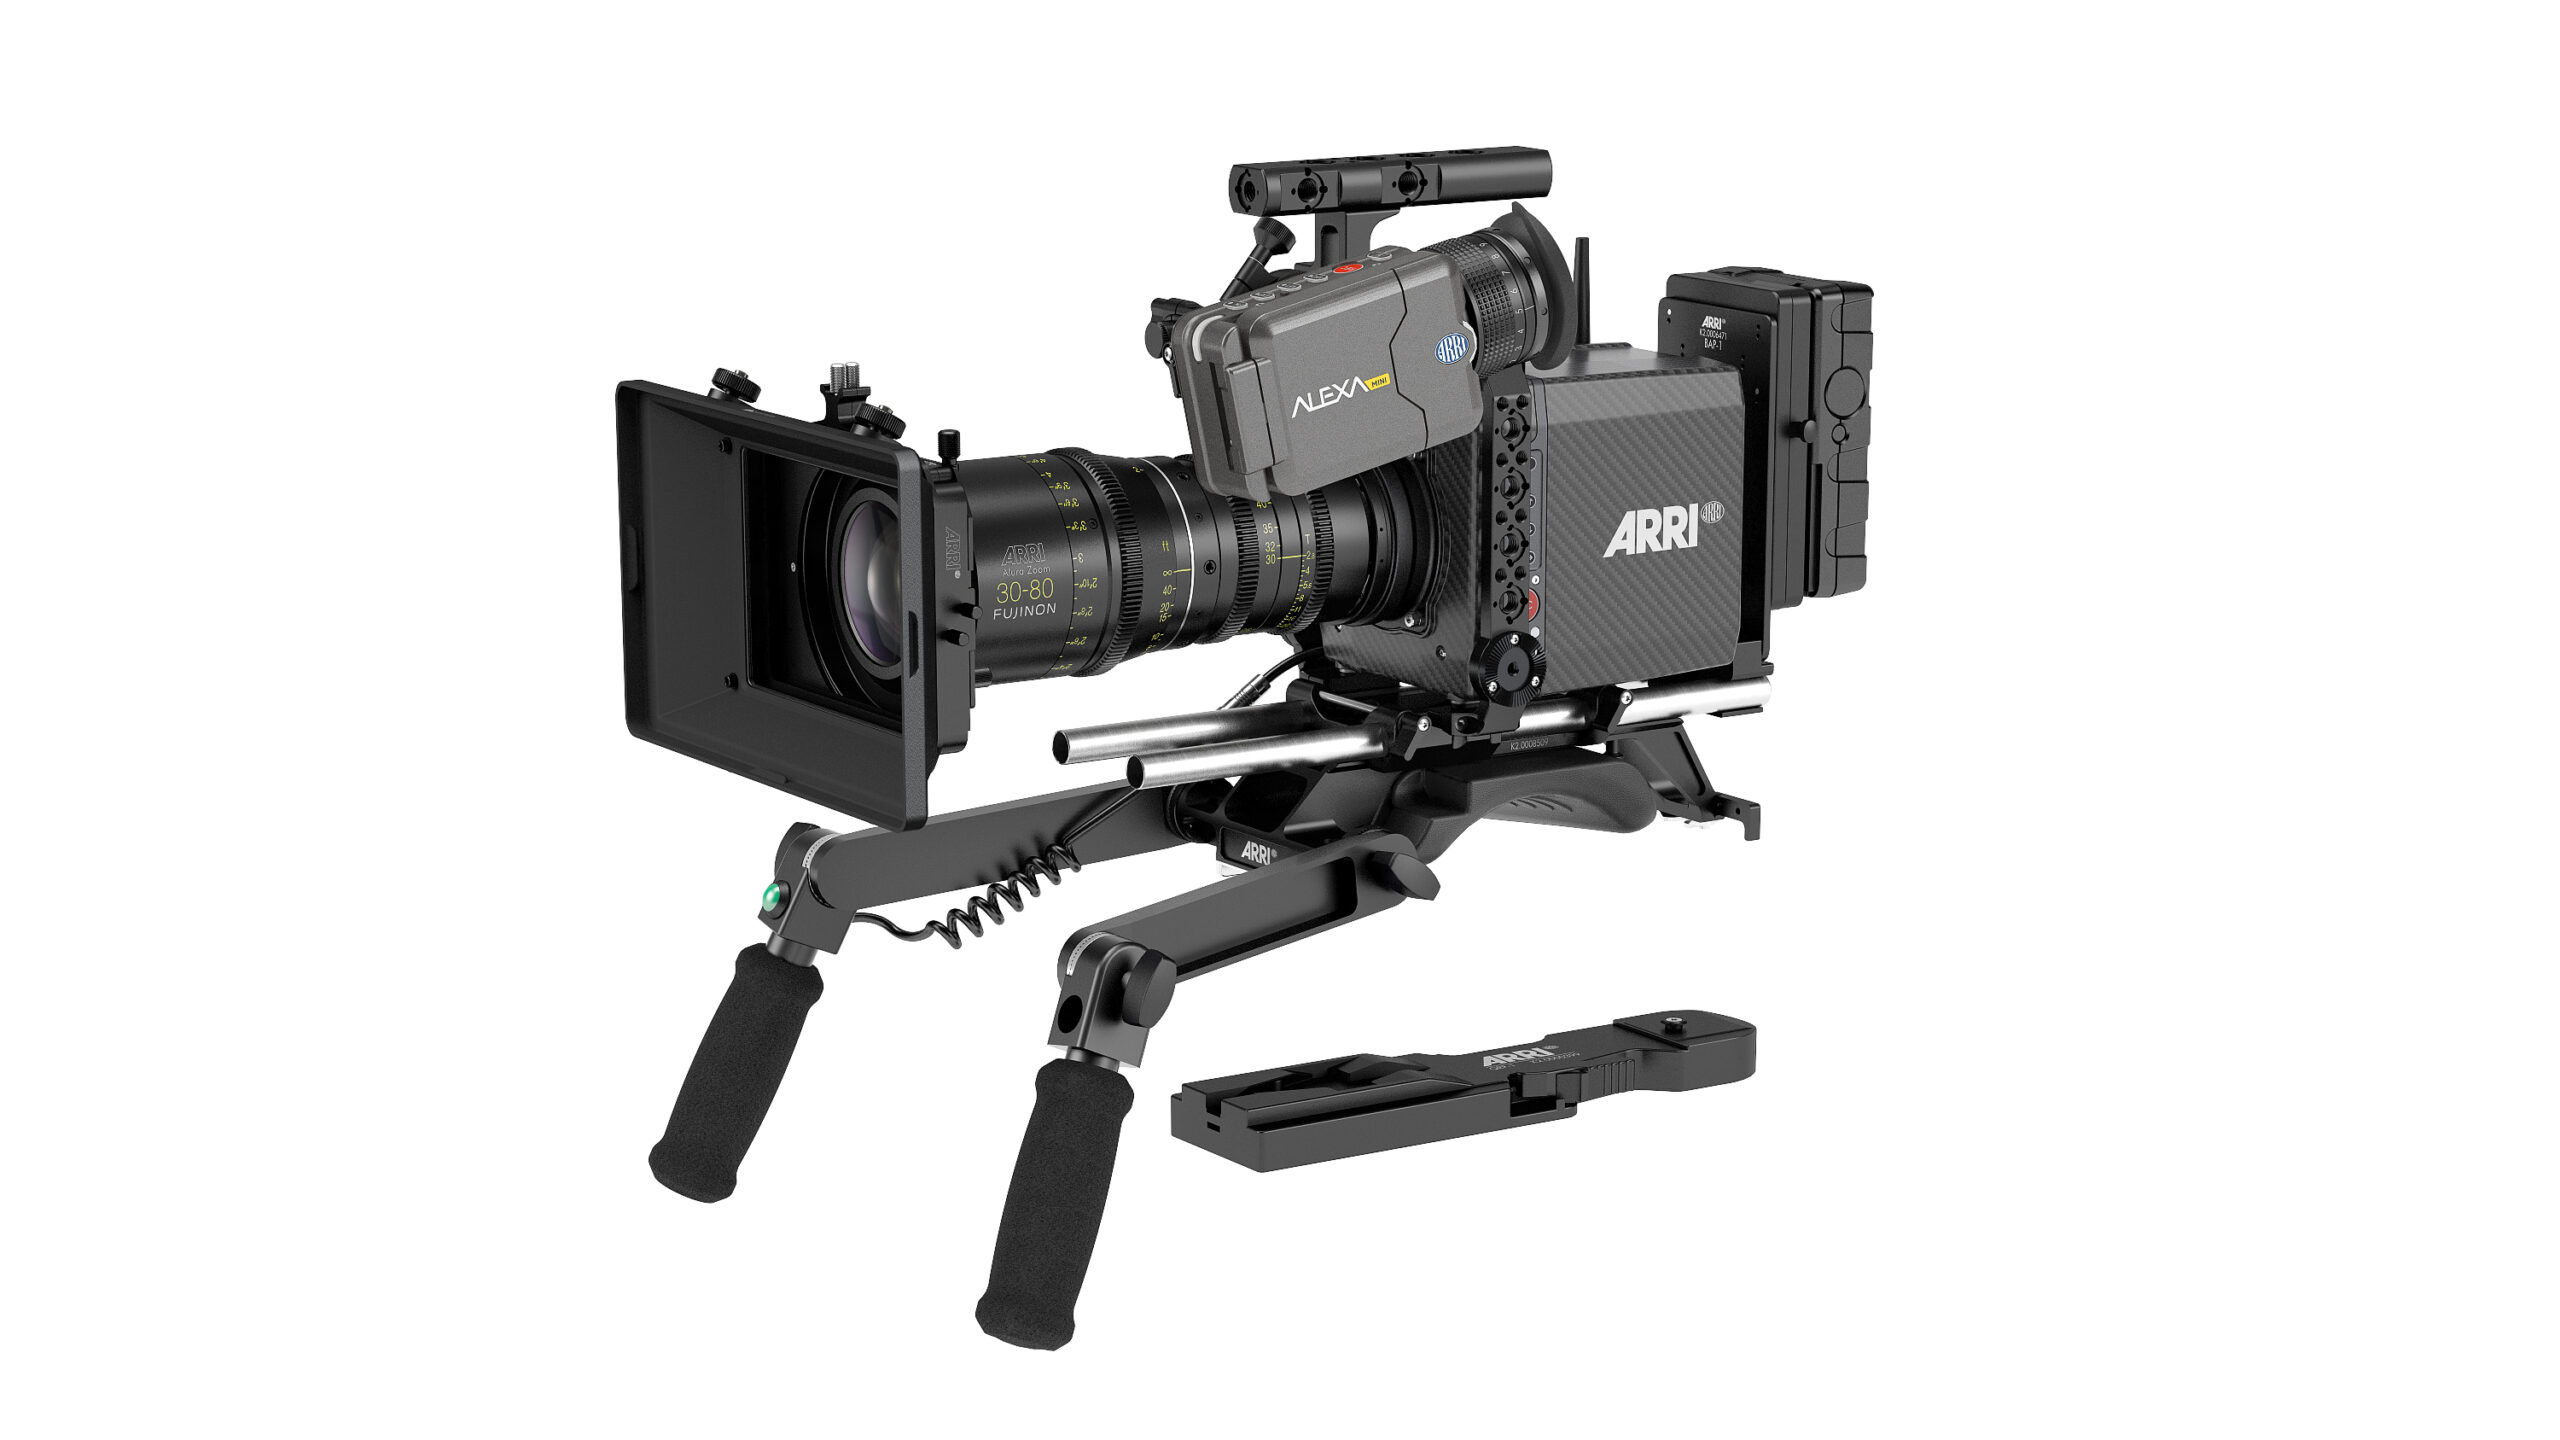 evigt Flagermus fortjener Broadcast Plate for ALEXA Mini: Arri Announces New Accessories | CineD